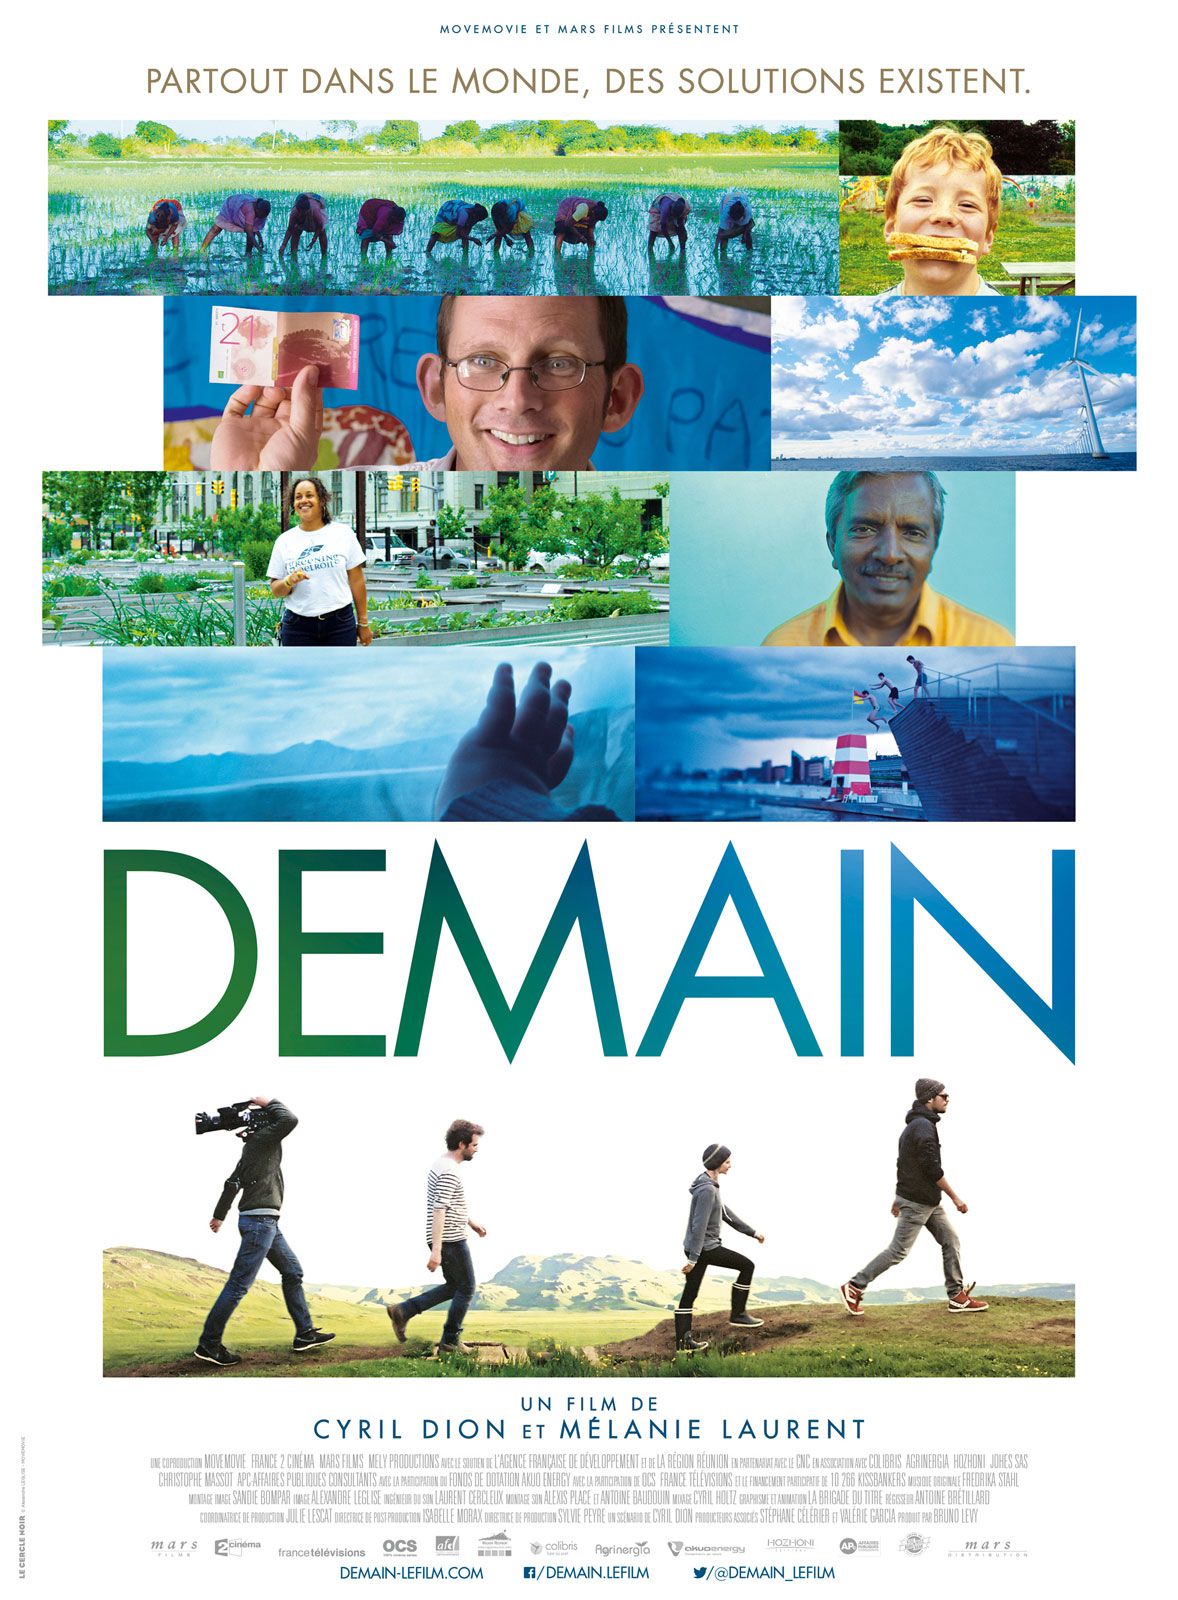 Demain - Documentaire (2015) streaming VF gratuit complet